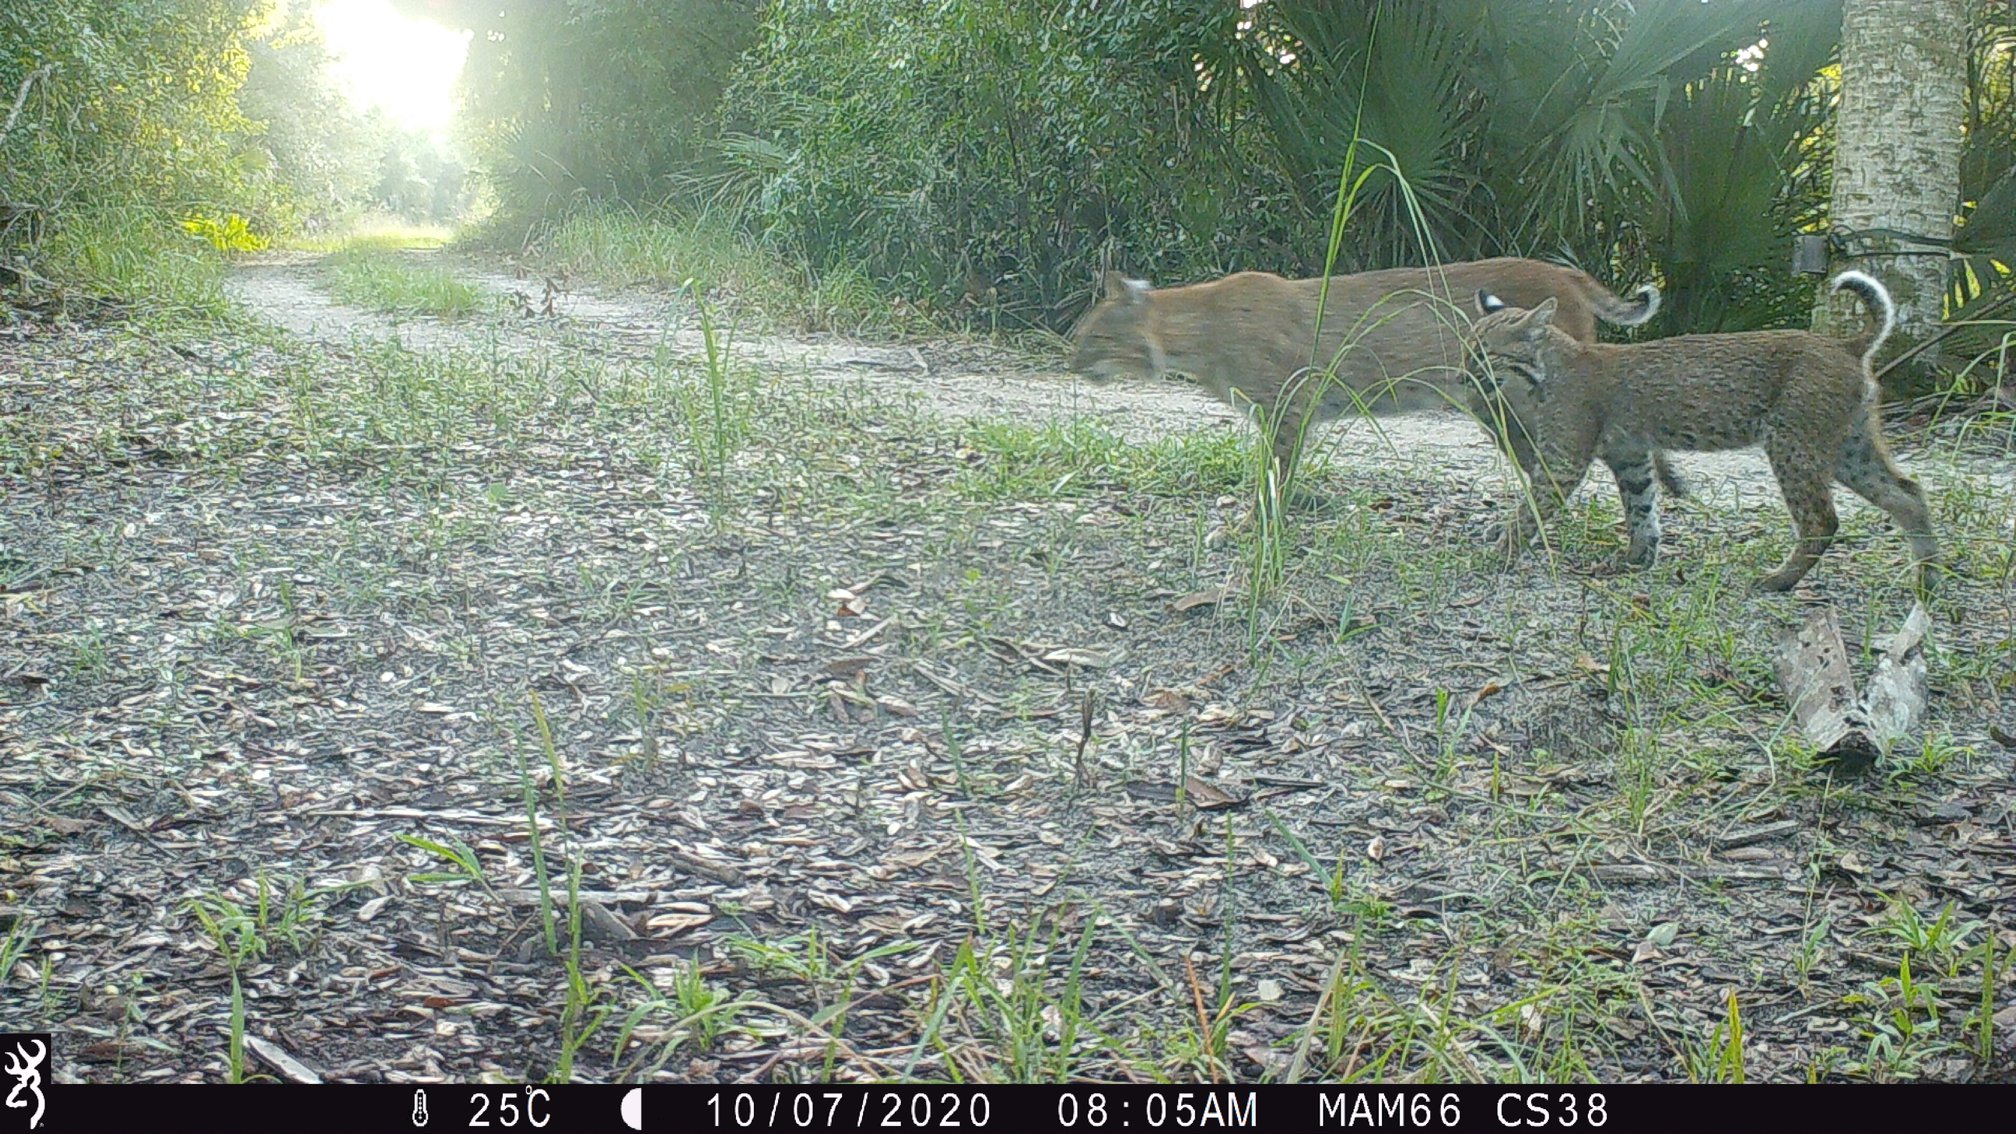 Camera trap photo showing a bobcat and kitten.